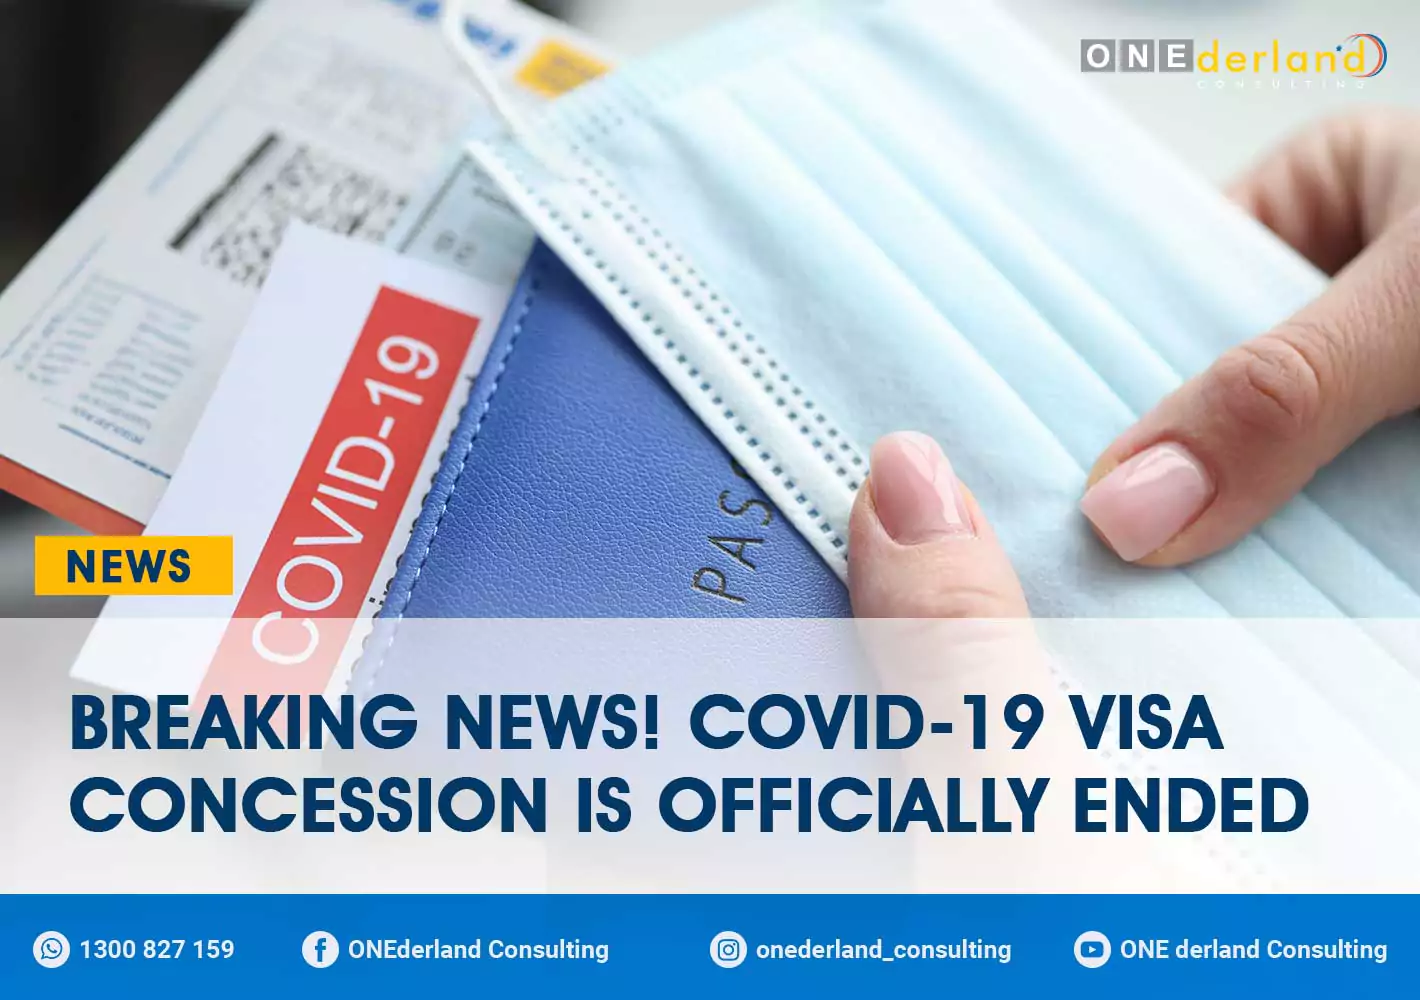 Covid-19 Pandemic Concession is Officially Ended